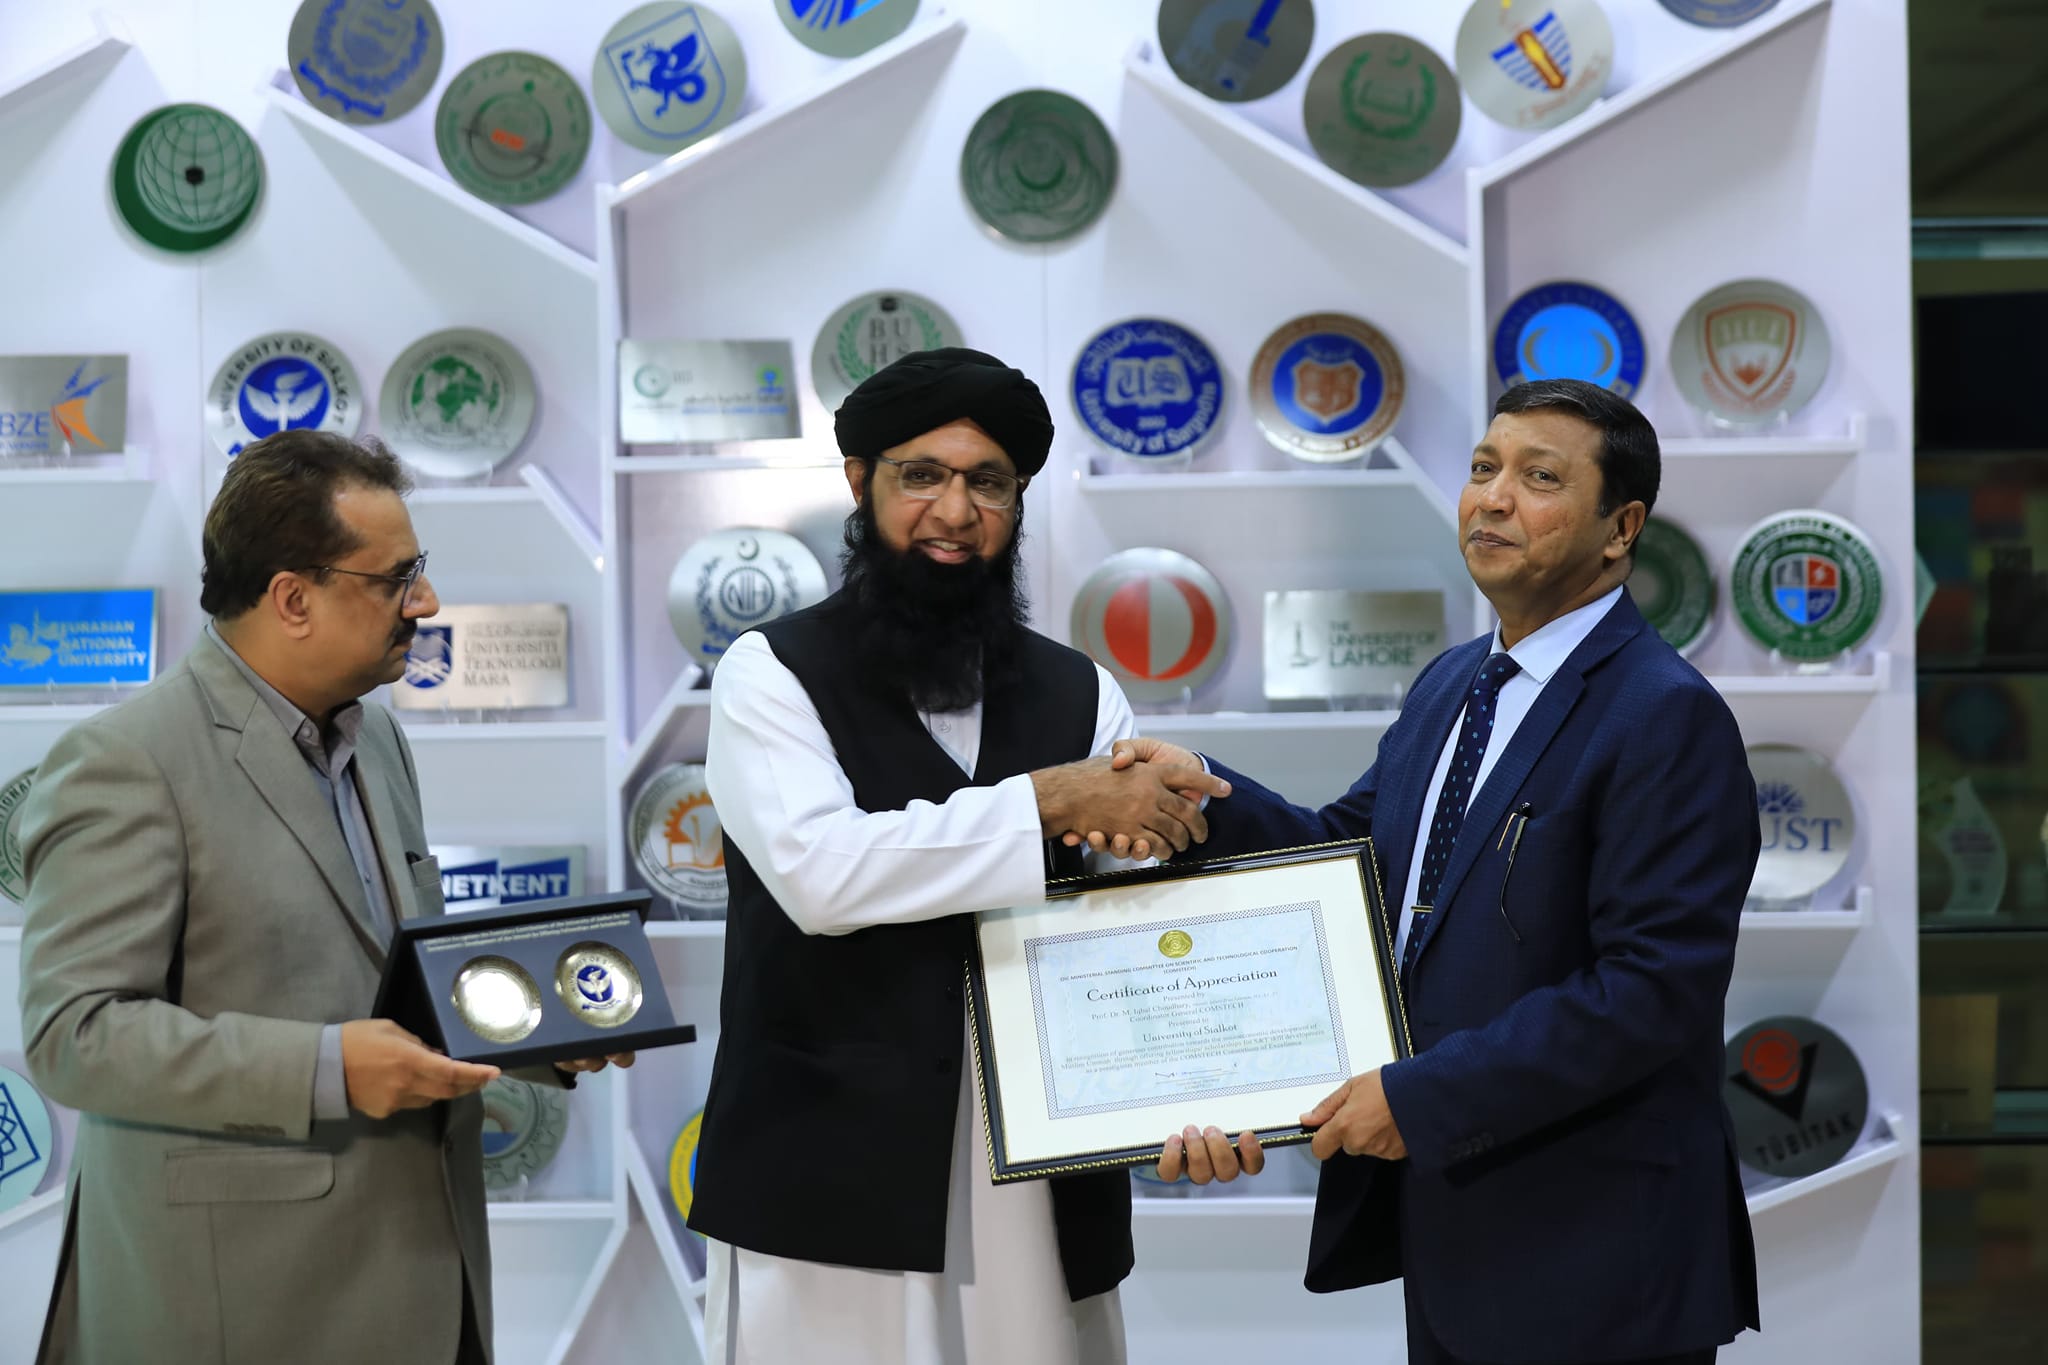 COMSTECH recognizes the contributions the University of Sialkot for CCoE